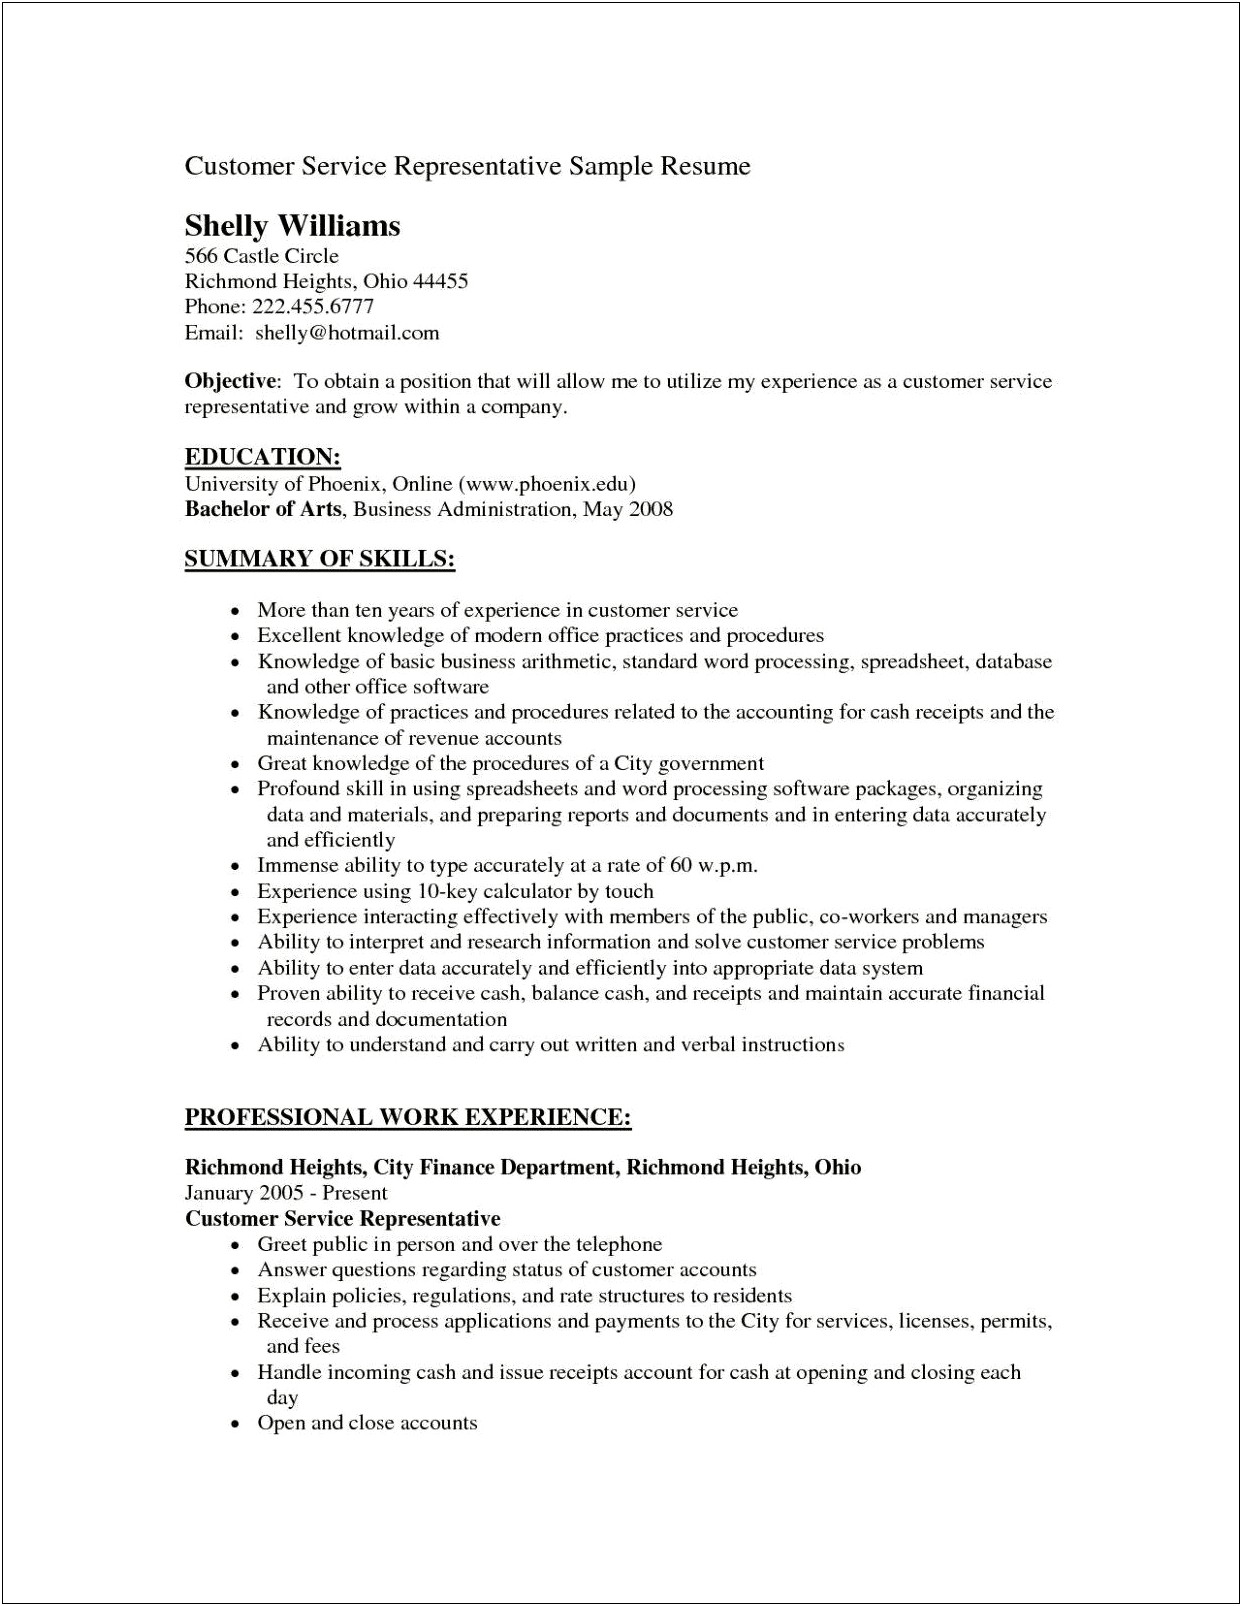 Resume Objective Format Financial Services